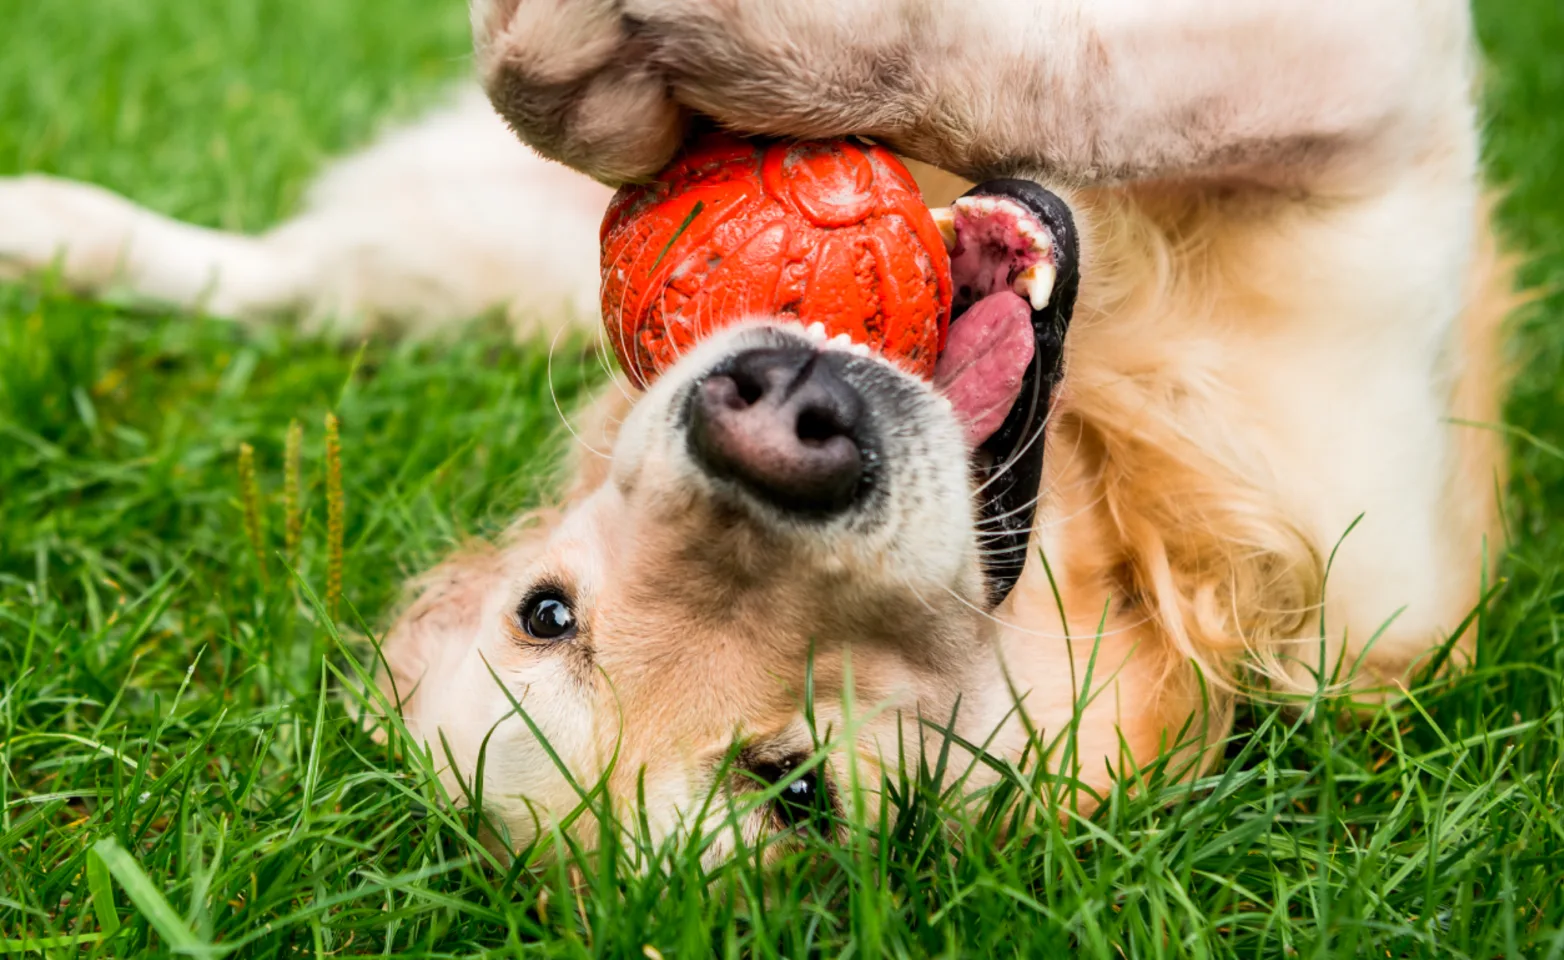 Dog with a orange ball in mouth